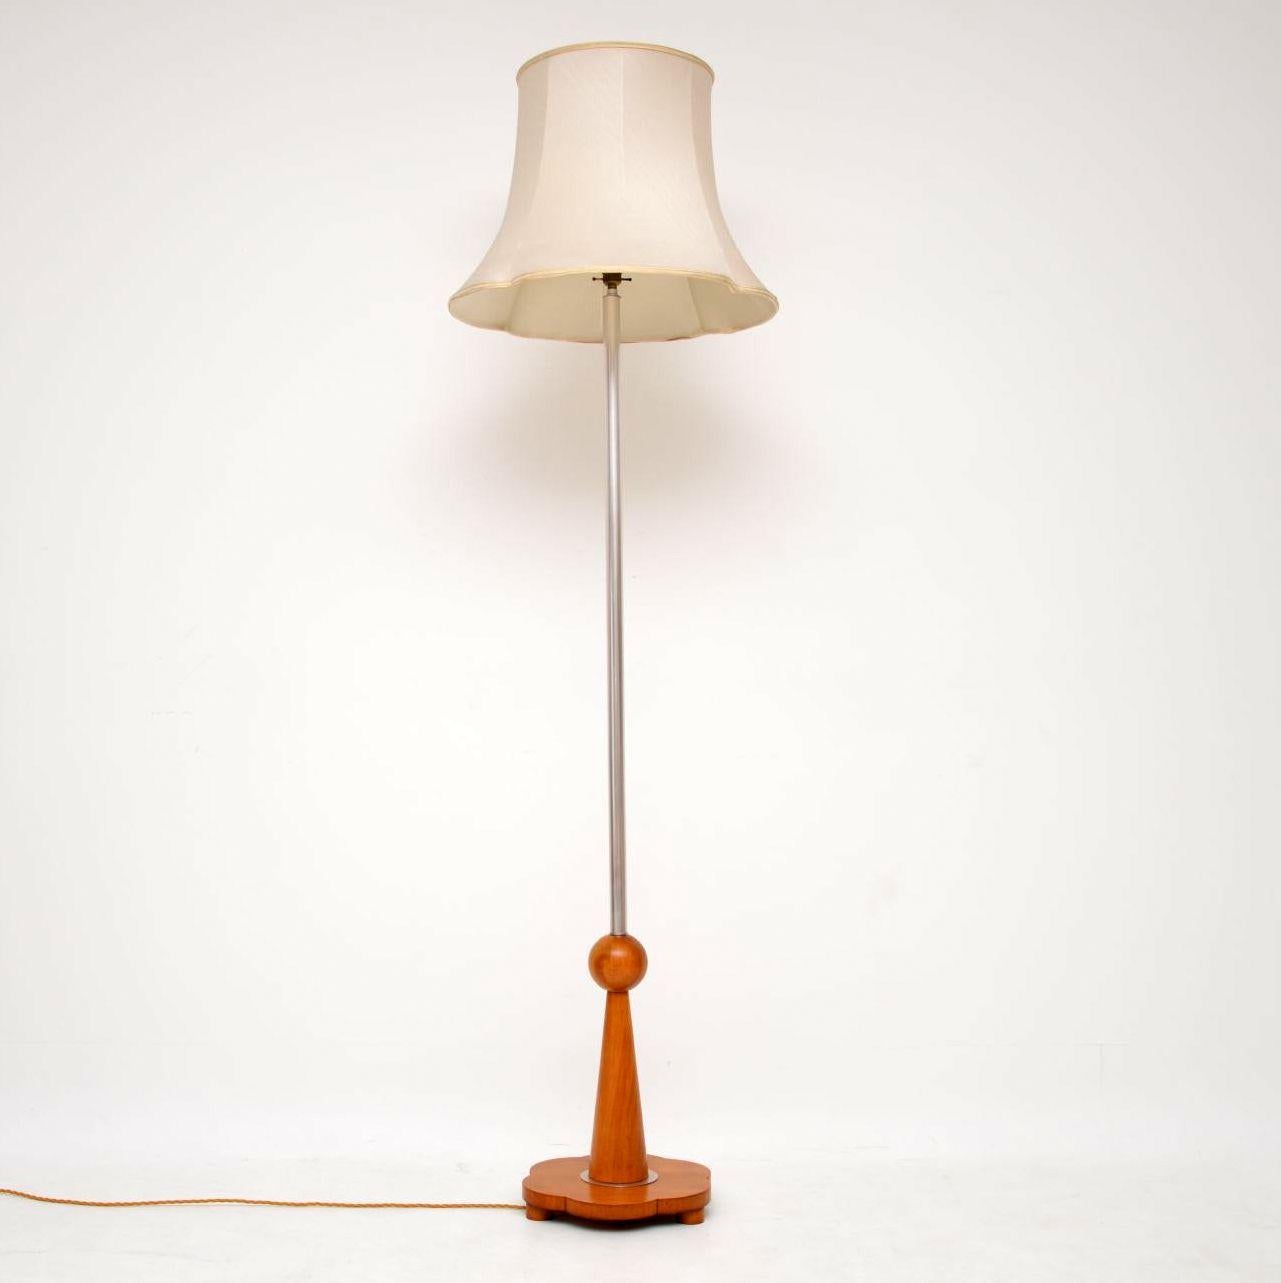 A beautiful original art deco period floor lamp with a satin wood base and stainless steel frame. We have had the wood stripped and re-polished, this has been re-wired and is in good working order. The shade has some minor wear, overall the